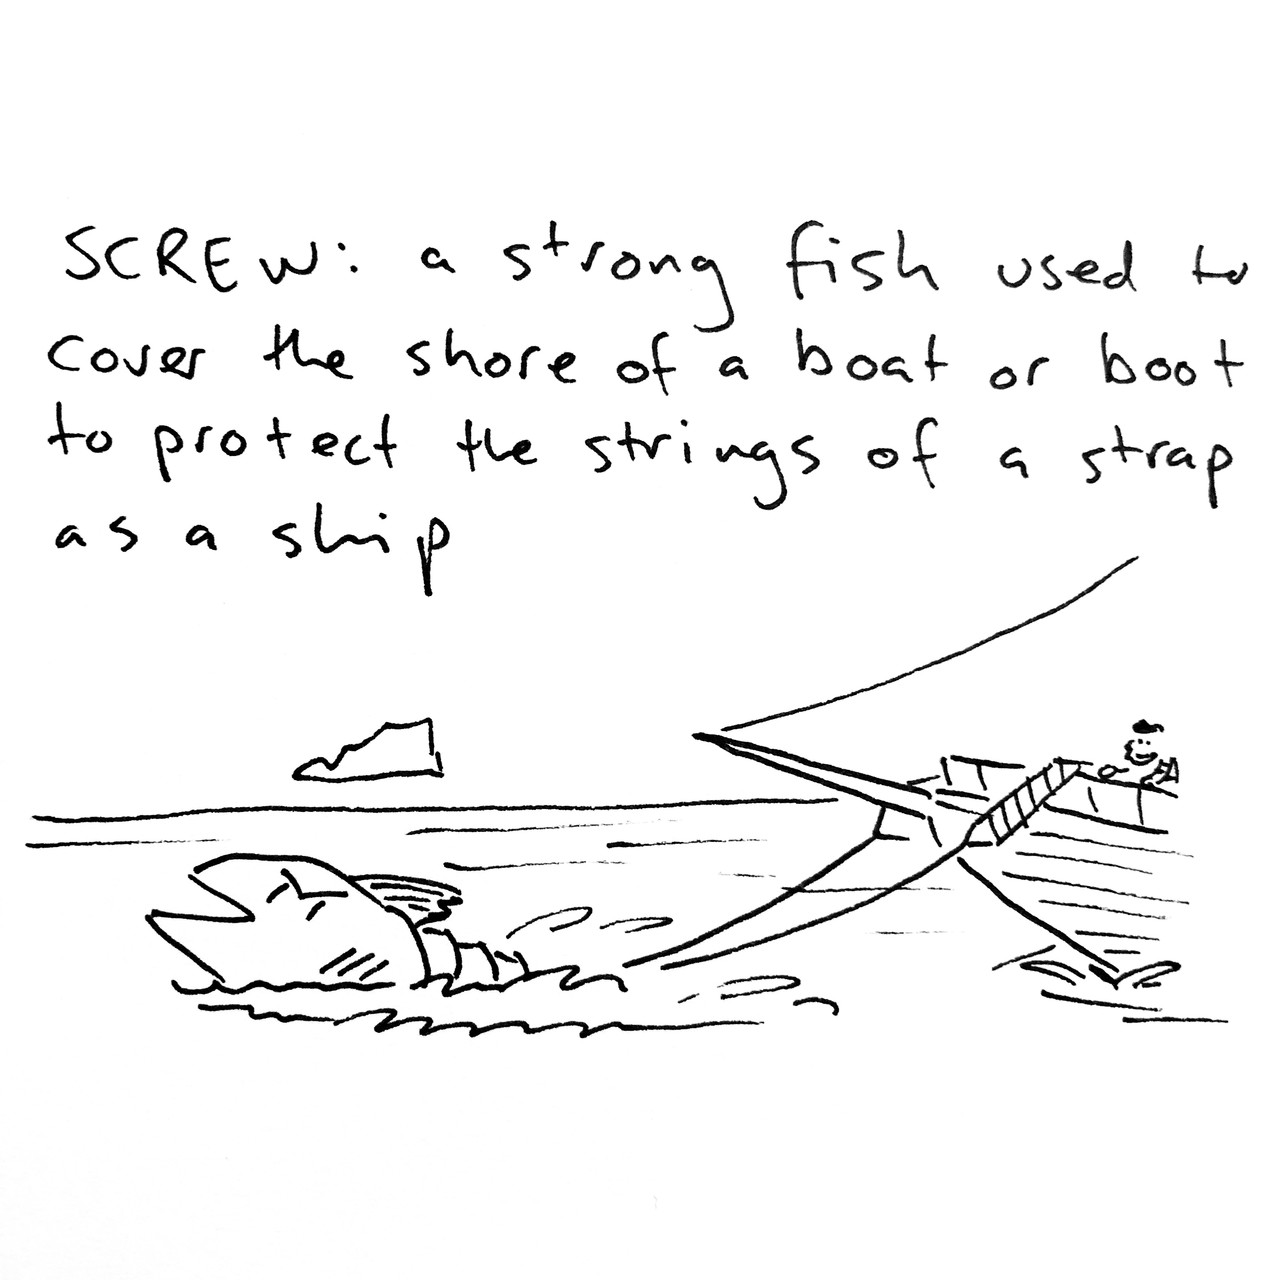 SCREW: a strong fish used to cover the shore of a boat or boot to protect the strings of a strap as a ship. The drawing depicts a large fish with a helical body towing a sailing vessel through the ocean.